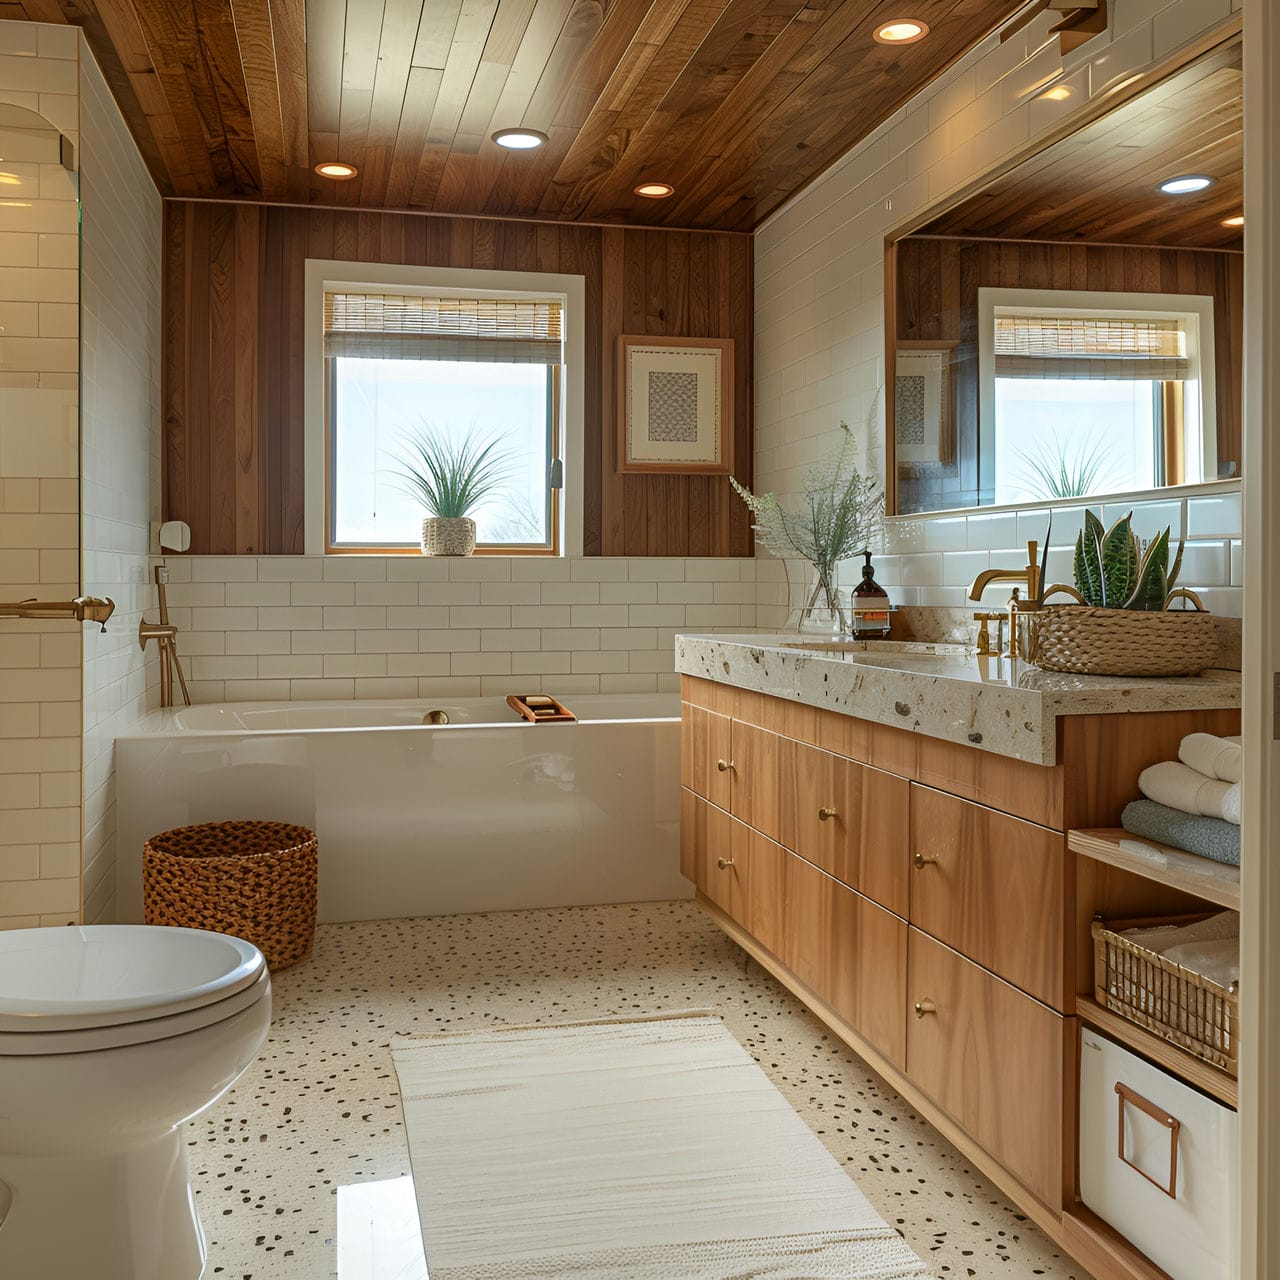 Master bathroom: size, functionality, uses, furniture and renovation